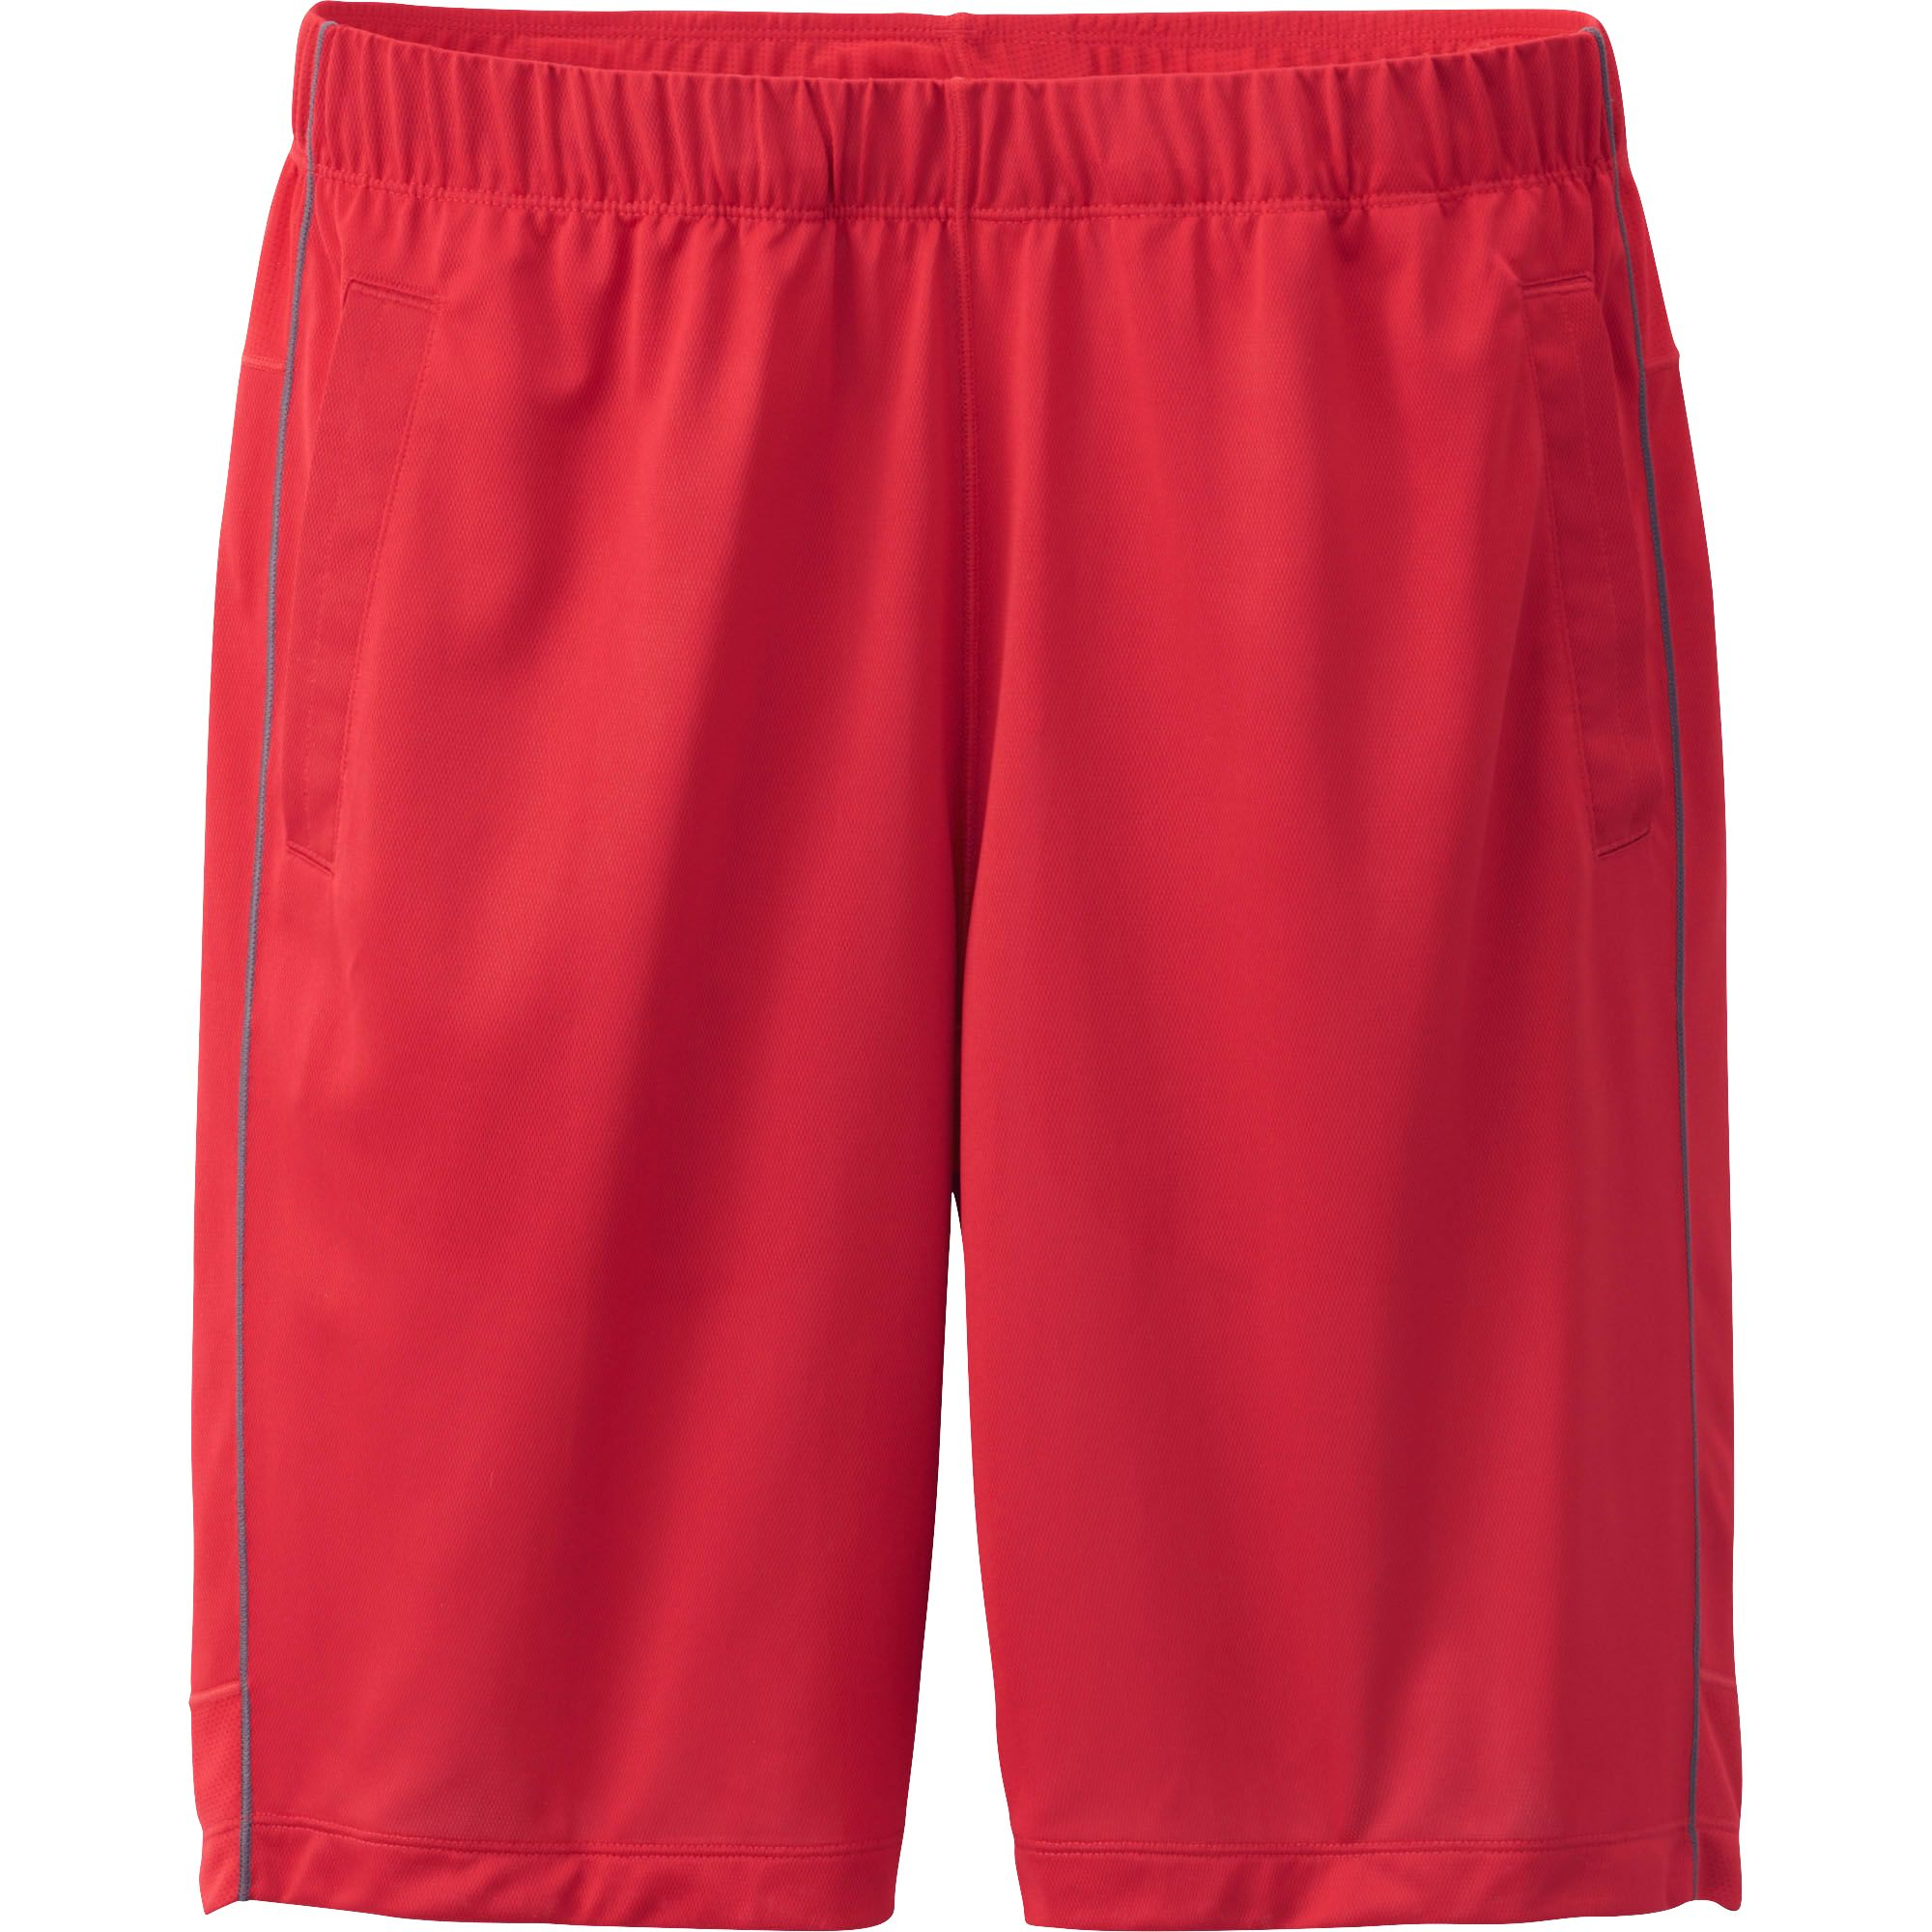  Uniqlo  Men Dry Mesh Short  Pants  Lined in Red for Men Lyst